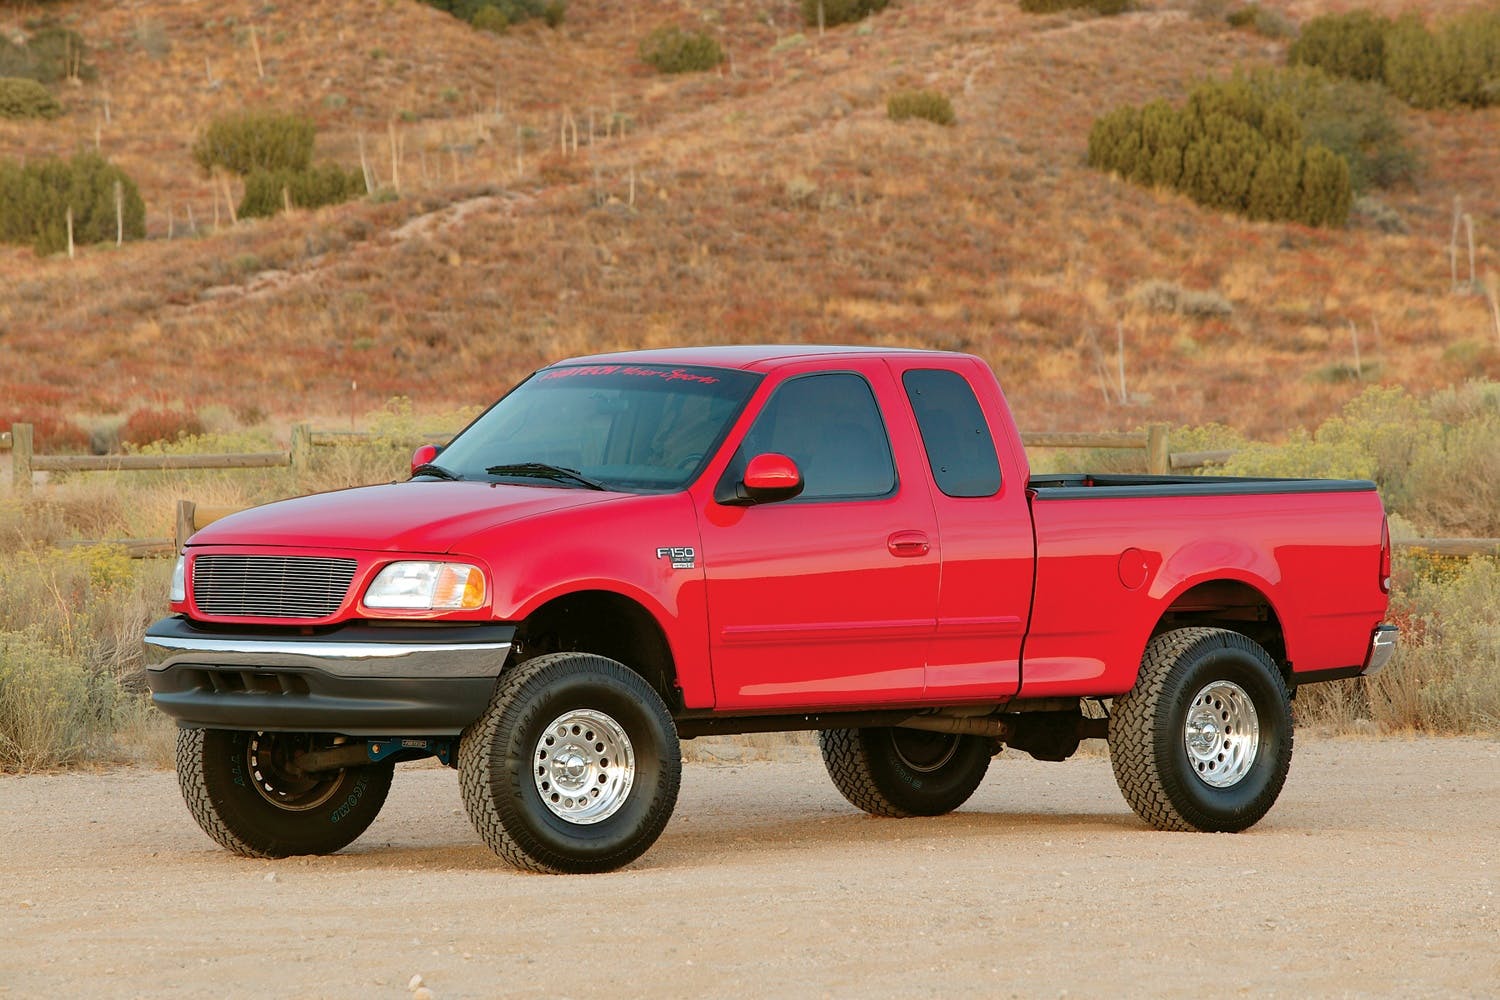 Fabtech K2008 7.5in. PERF SYS W/PERF SHKS 97-03 FORD F150/04 HERITAGE 2WD TRUCK 5 LUG/F250 7 L